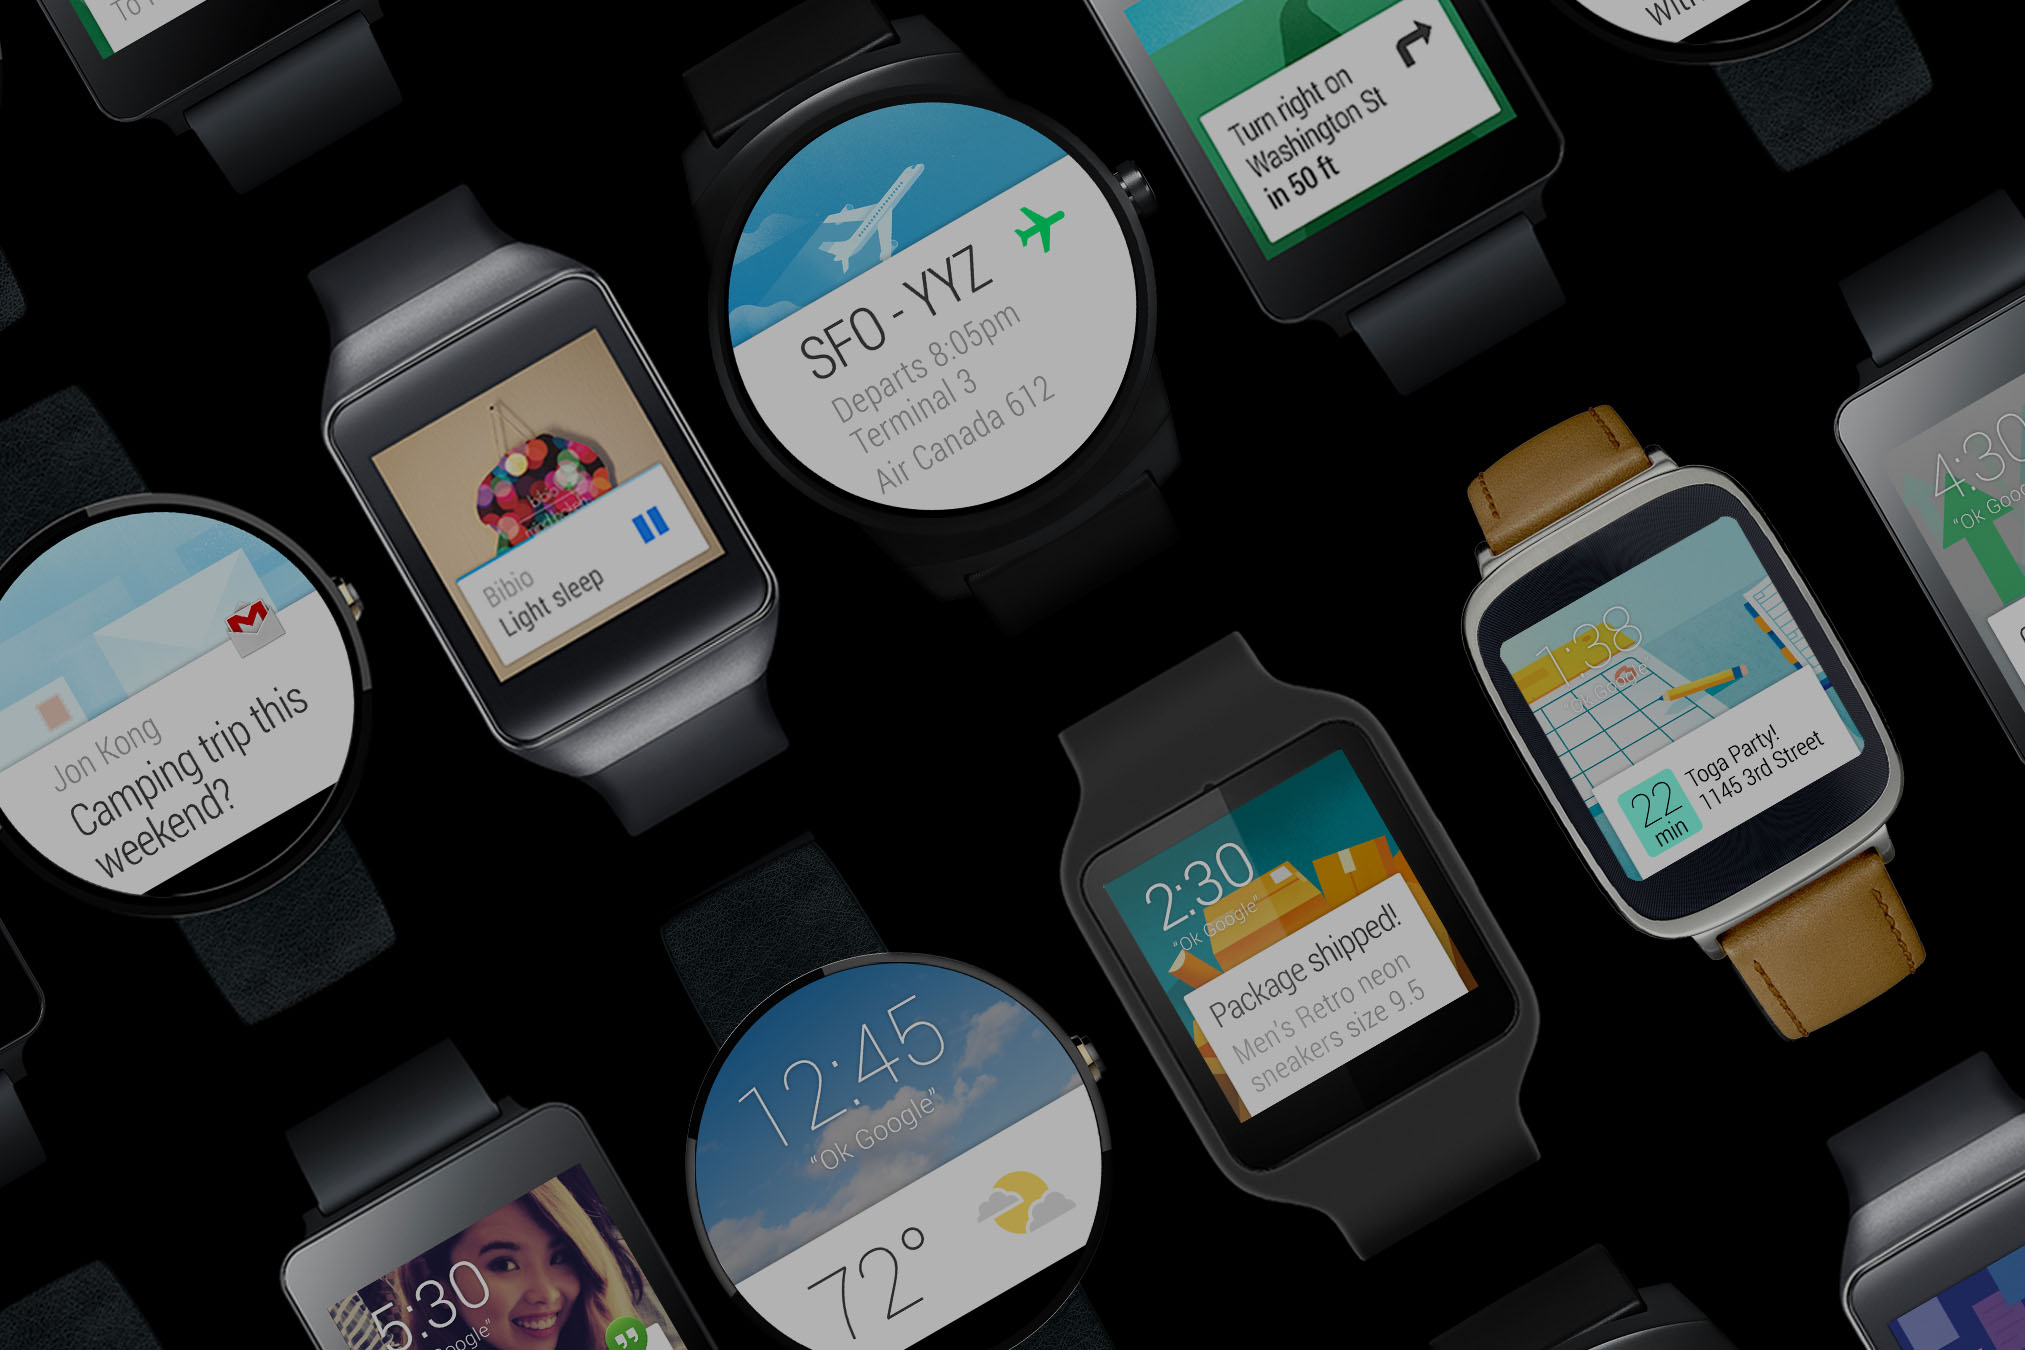 androidwear[1]